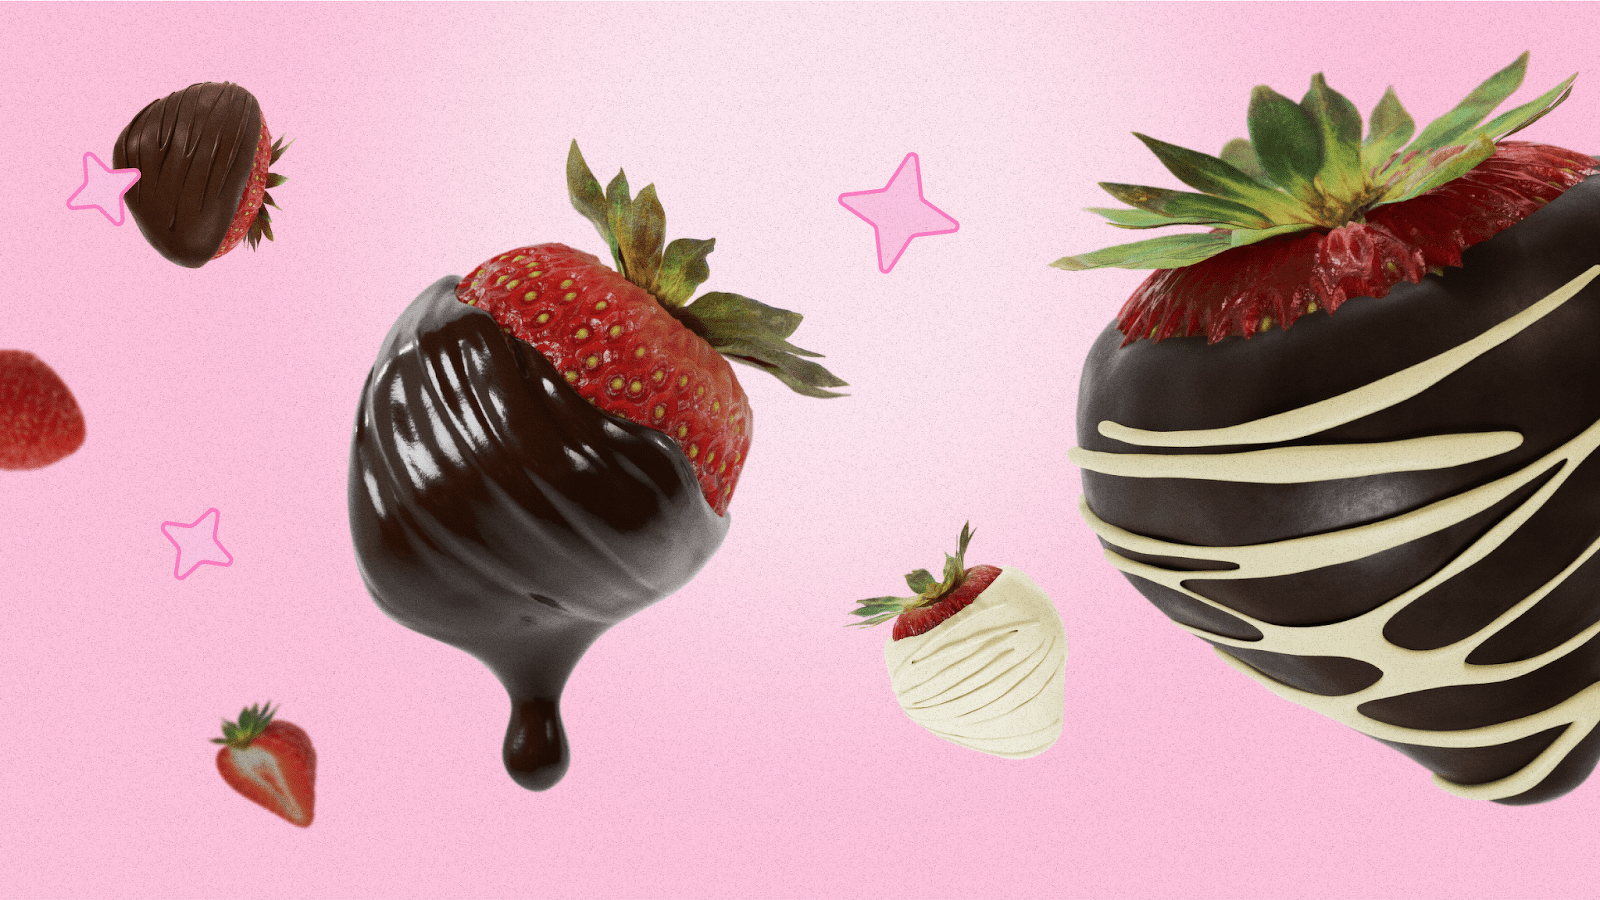 How to make chocolate-covered strawberries